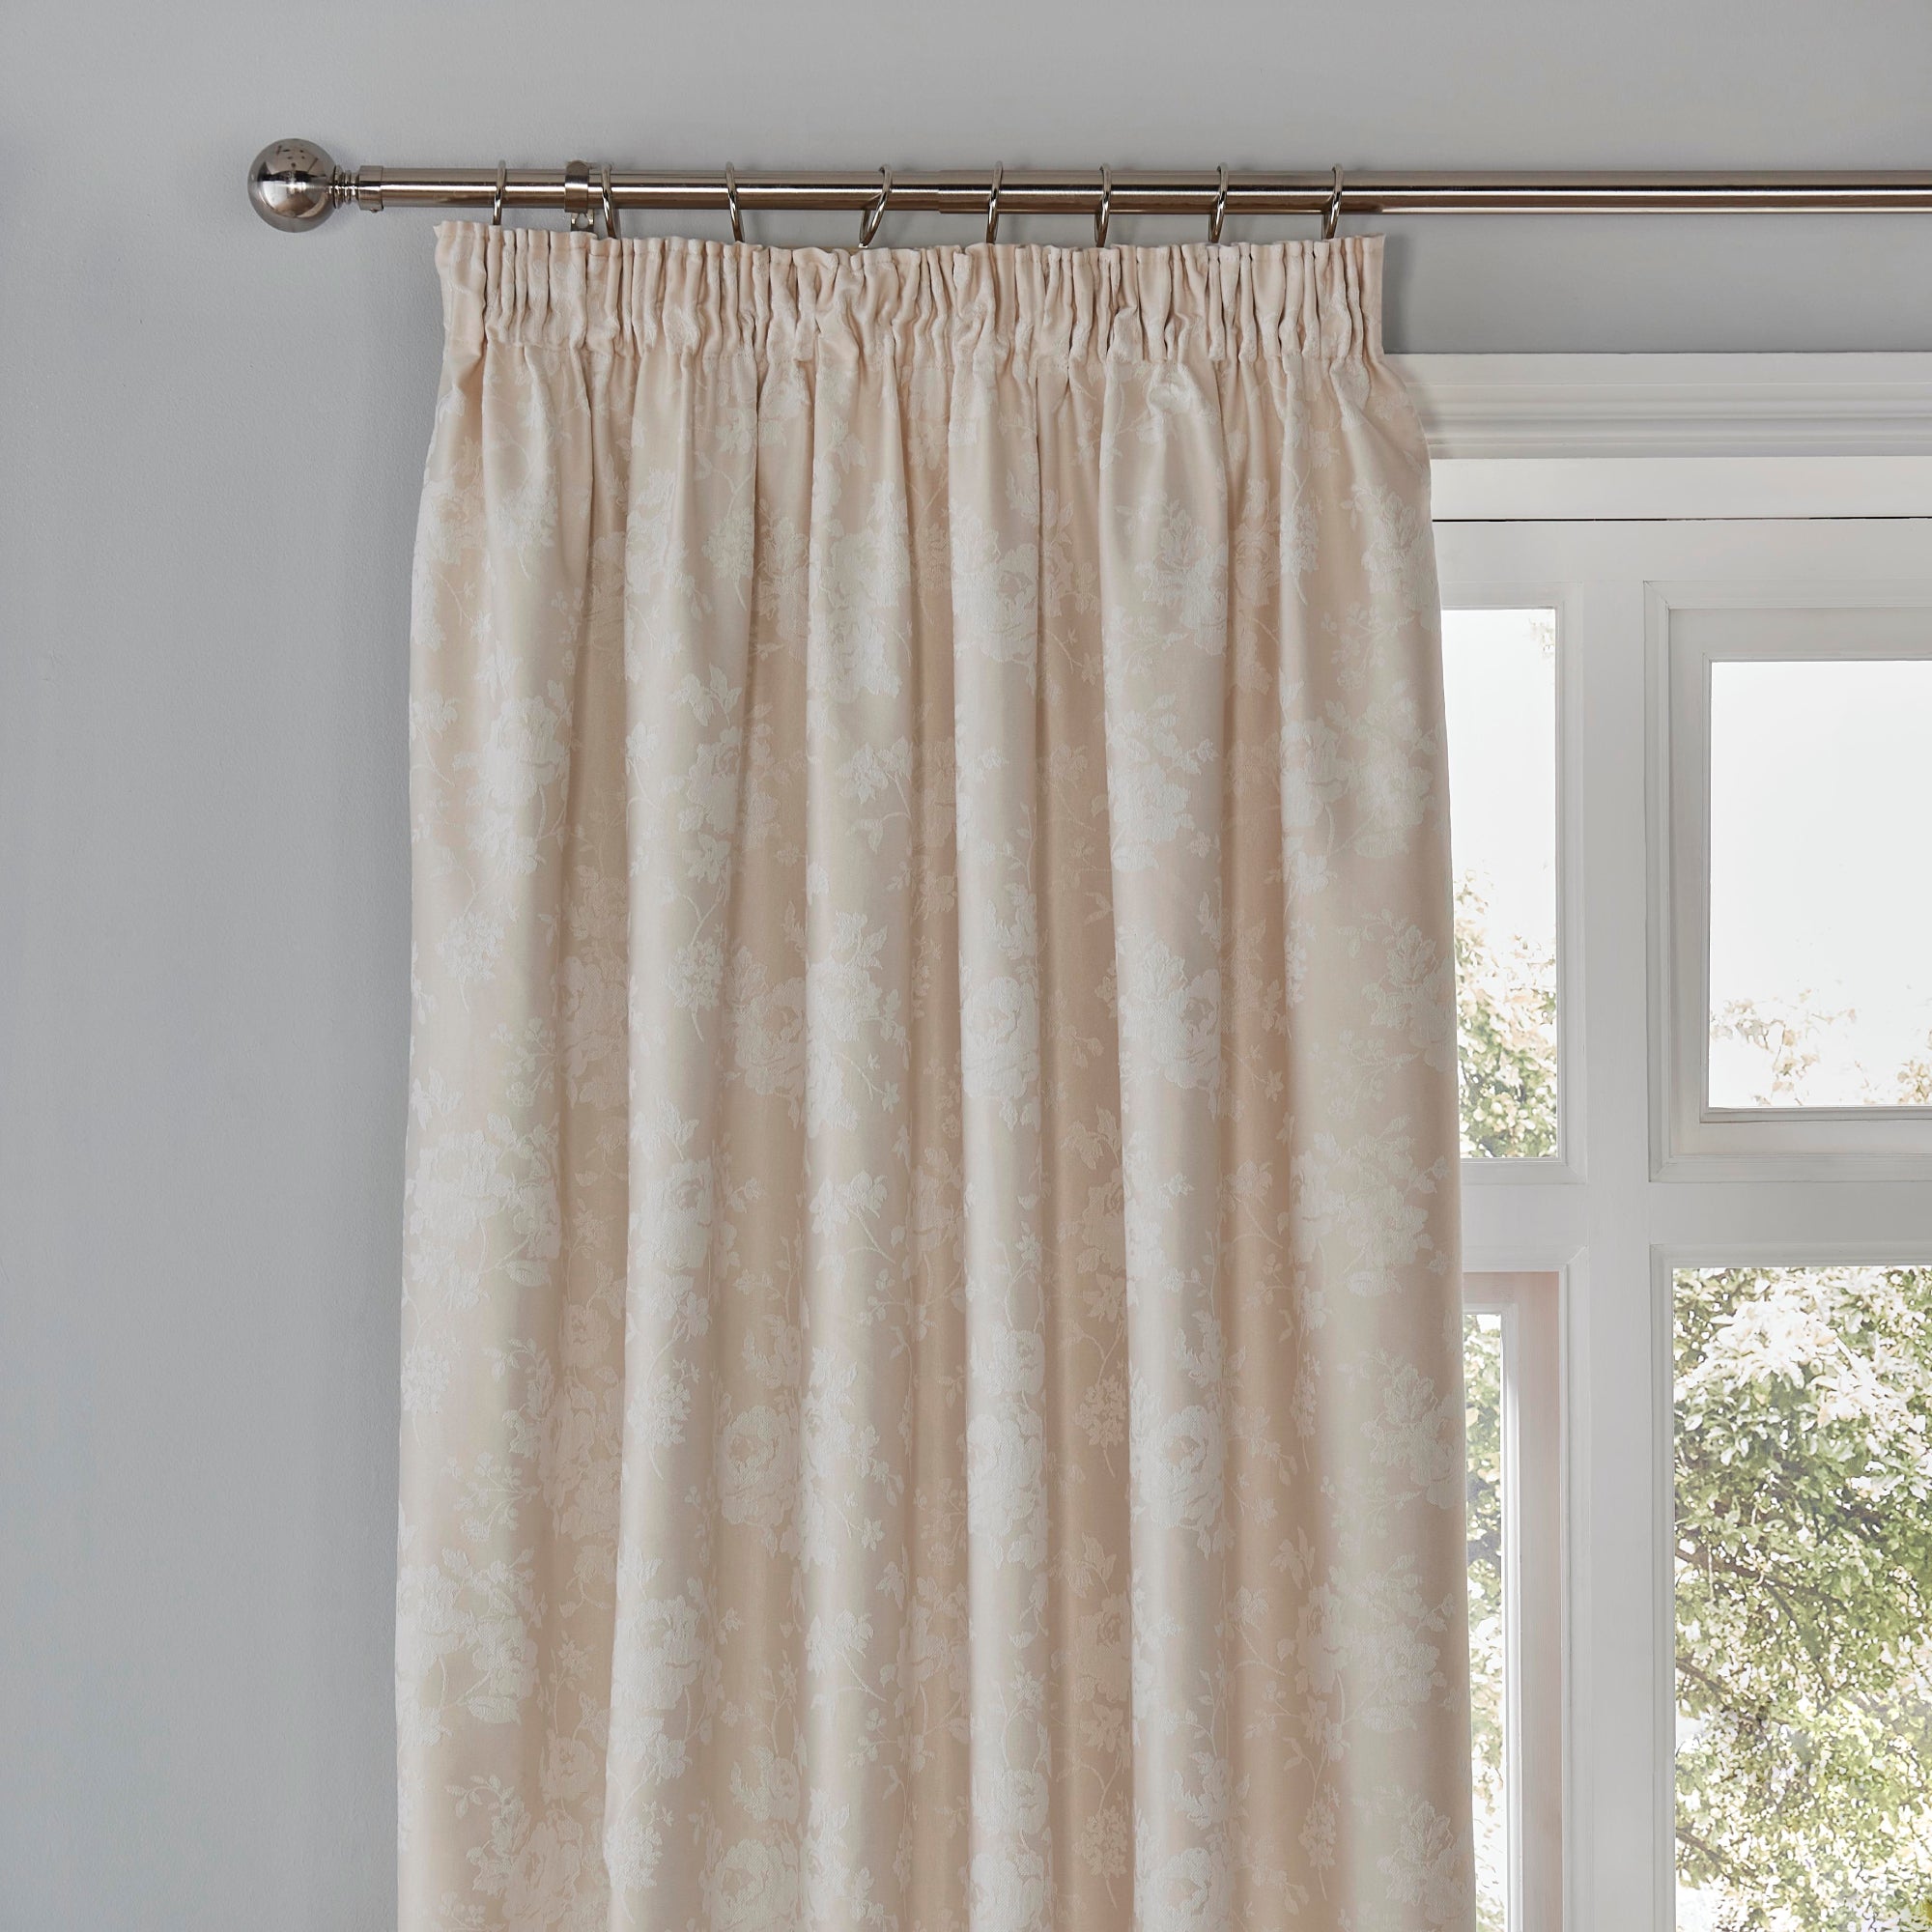 Pair of Pencil Pleat Curtains With Tie-Backs Imelda by Dreams & Drapes Woven in Ivory